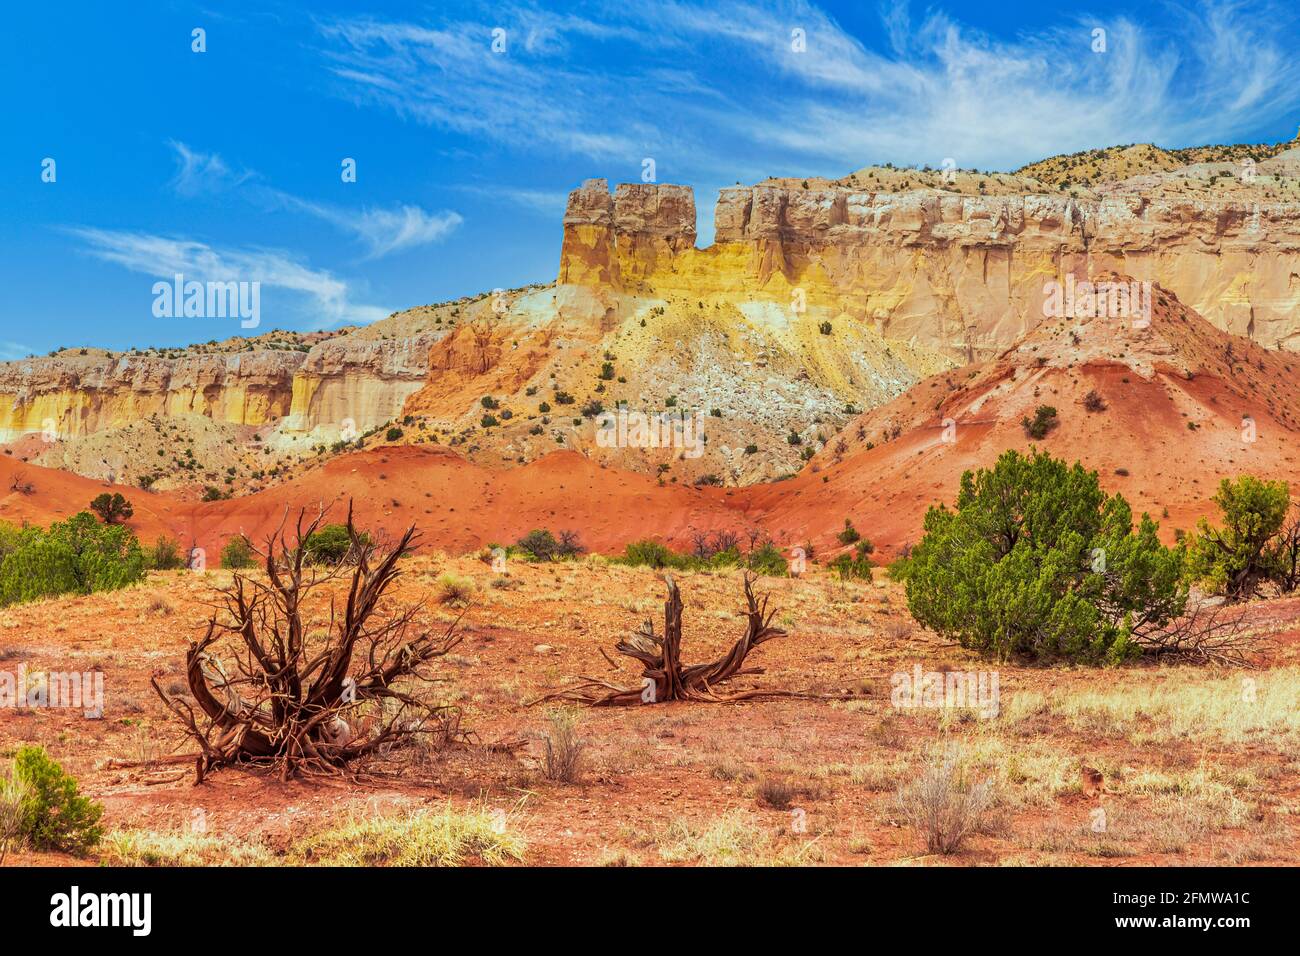 Landscape view of Chimney Rock at Abiqiu, New Mexico., USA. Stock Photo